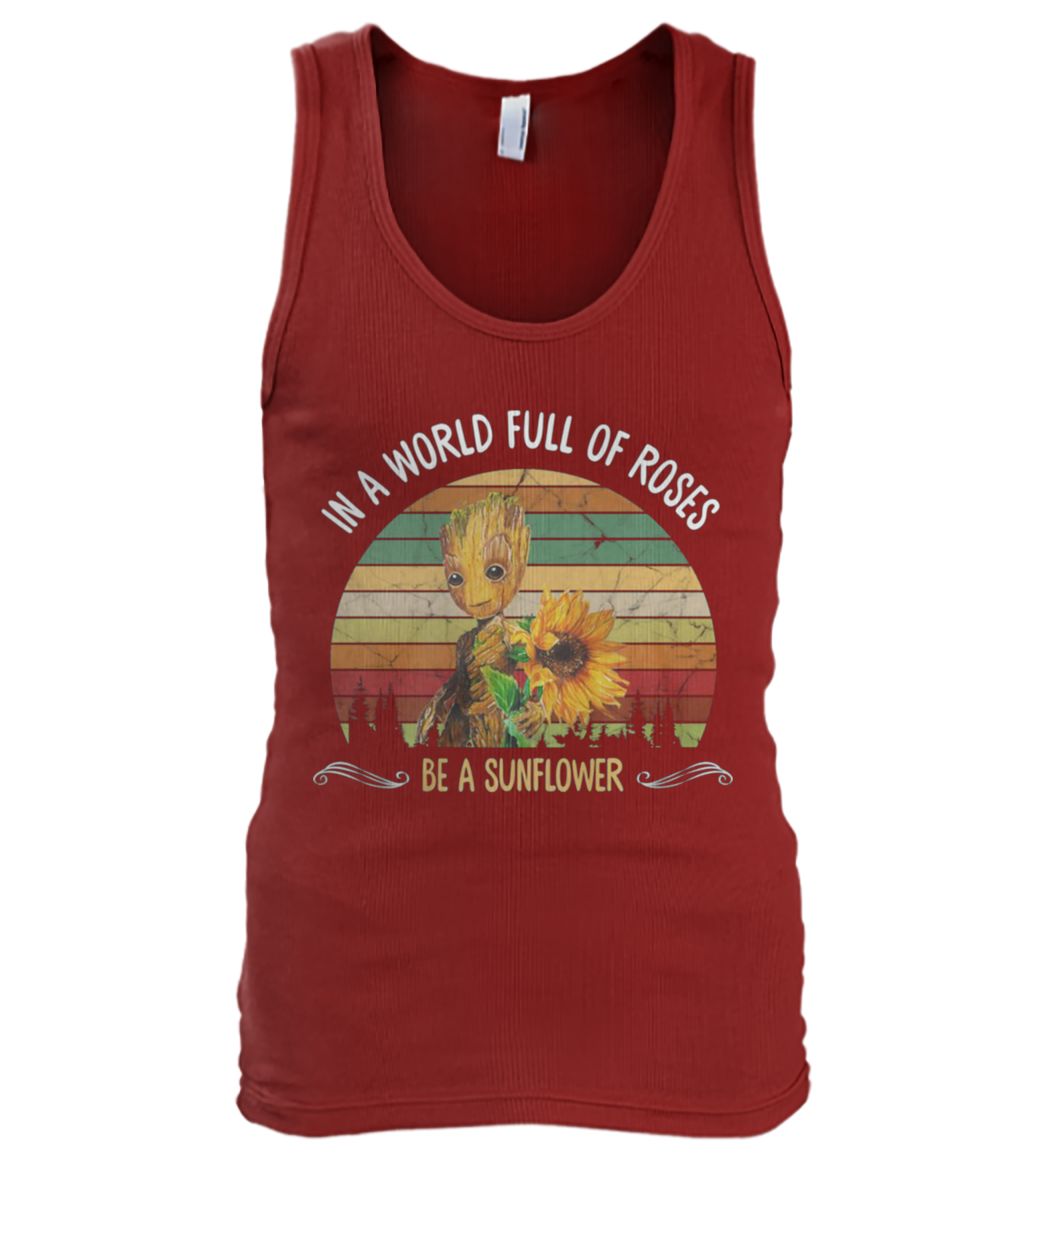 Vintage baby groot in a world full of roses be a sunflower men's tank top